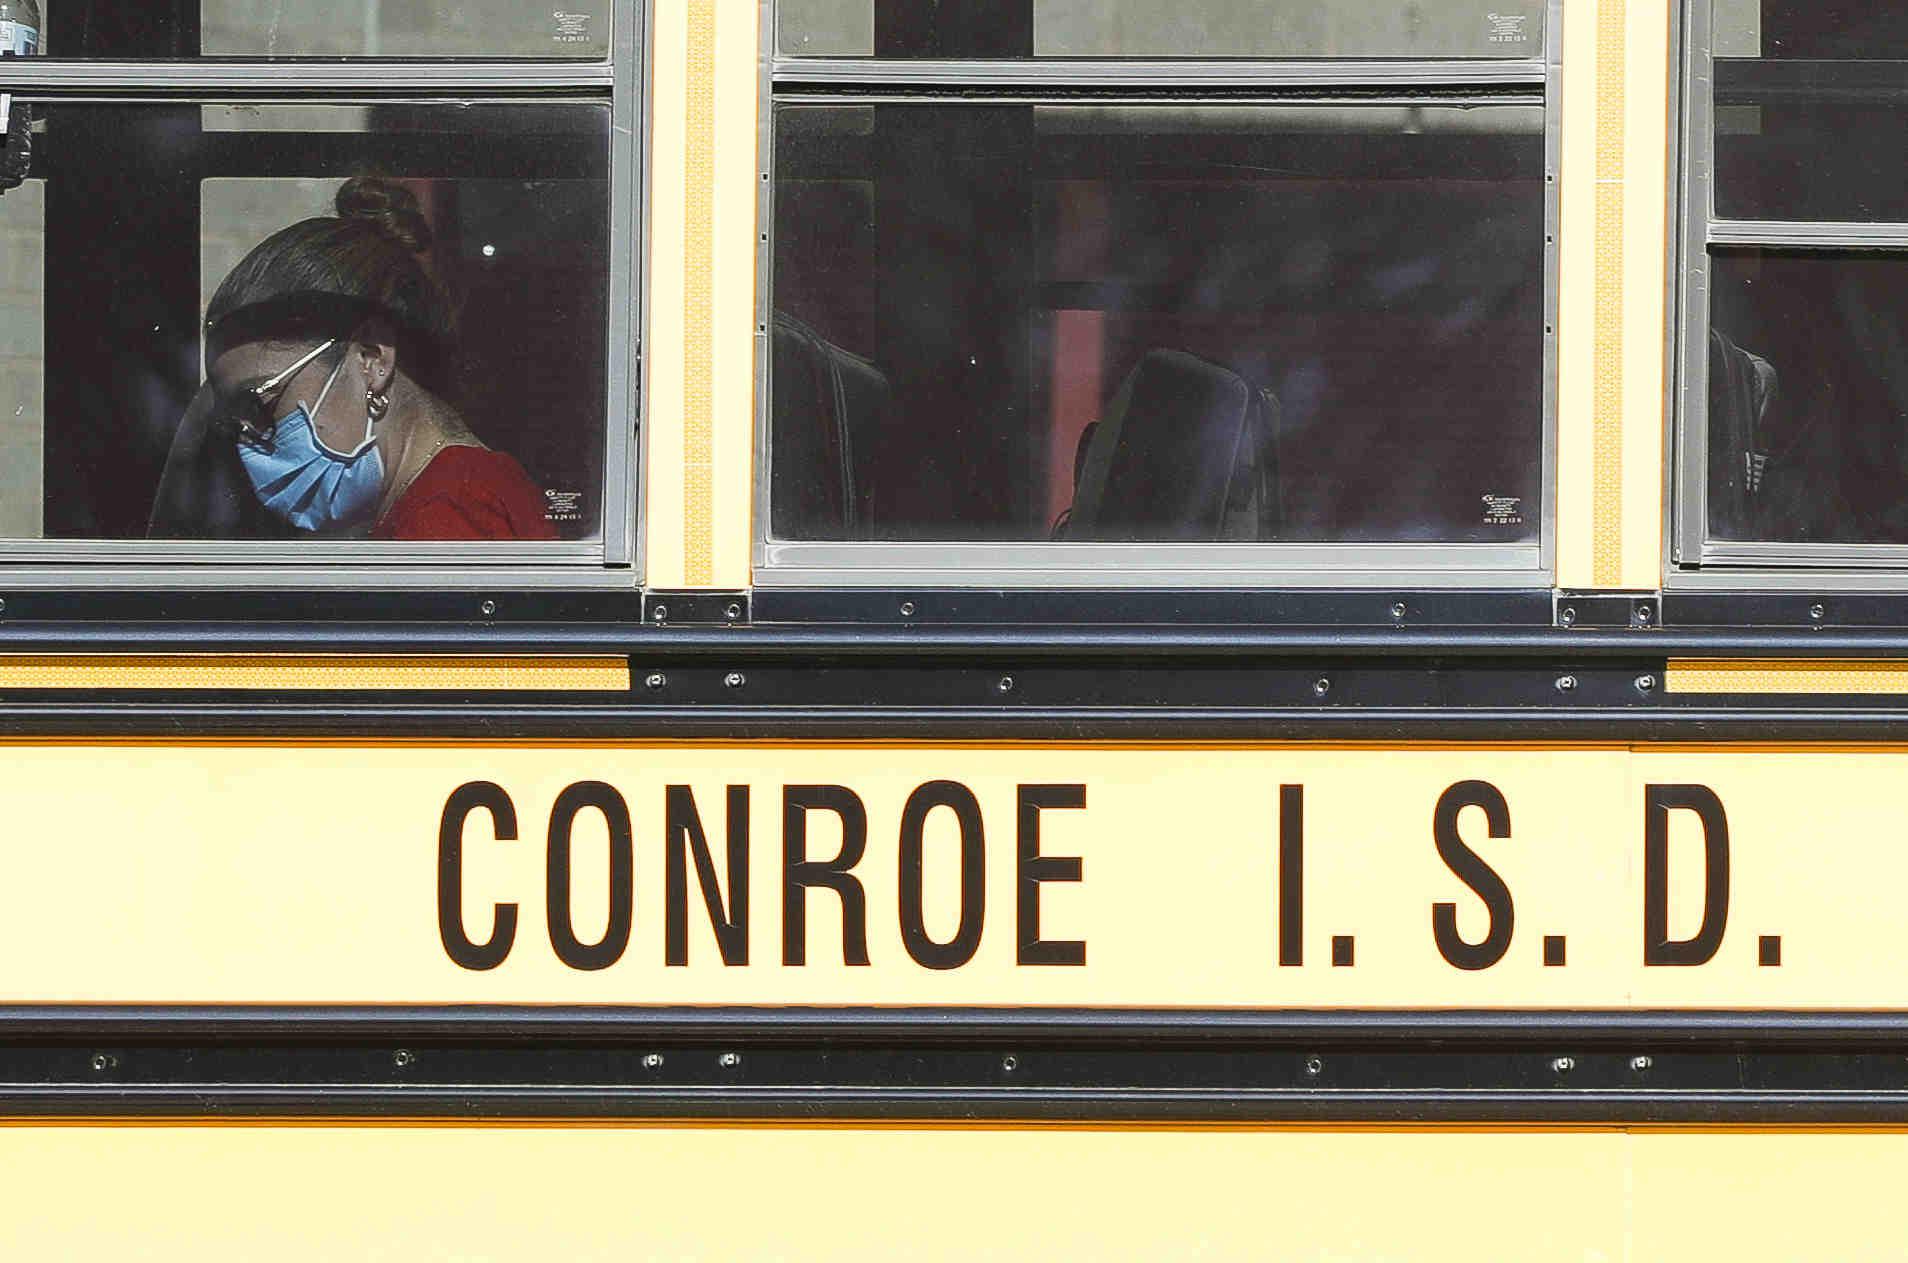 Magnolia Isd Calendar 2022 23 Conroe Isd Approves Its 2022-23 School Calendar With Aug. 10 Start Date